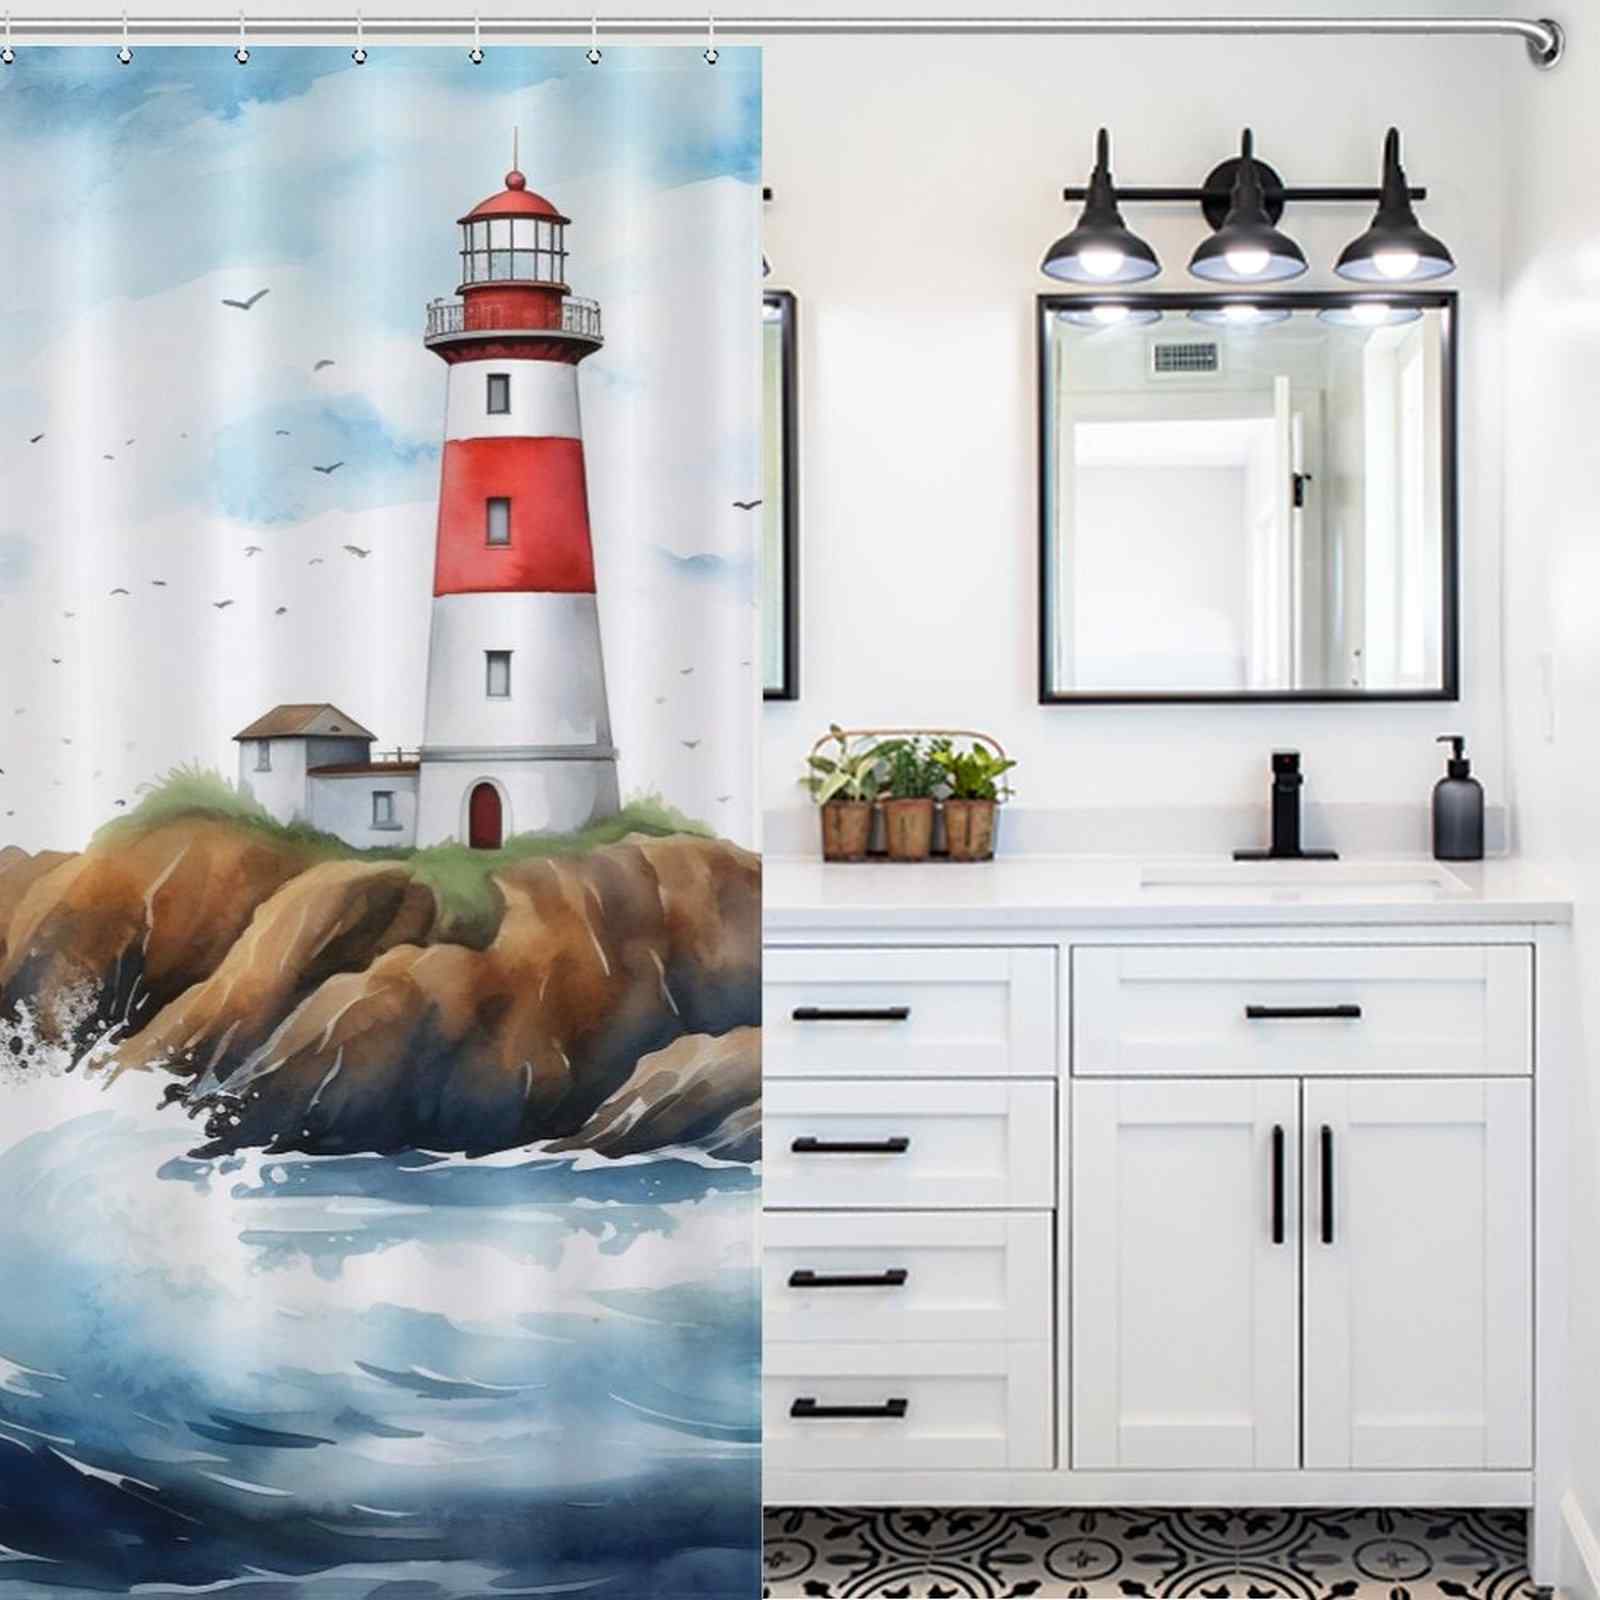 Coastal red top lighthouse shower curtain hangs in a white bathroom